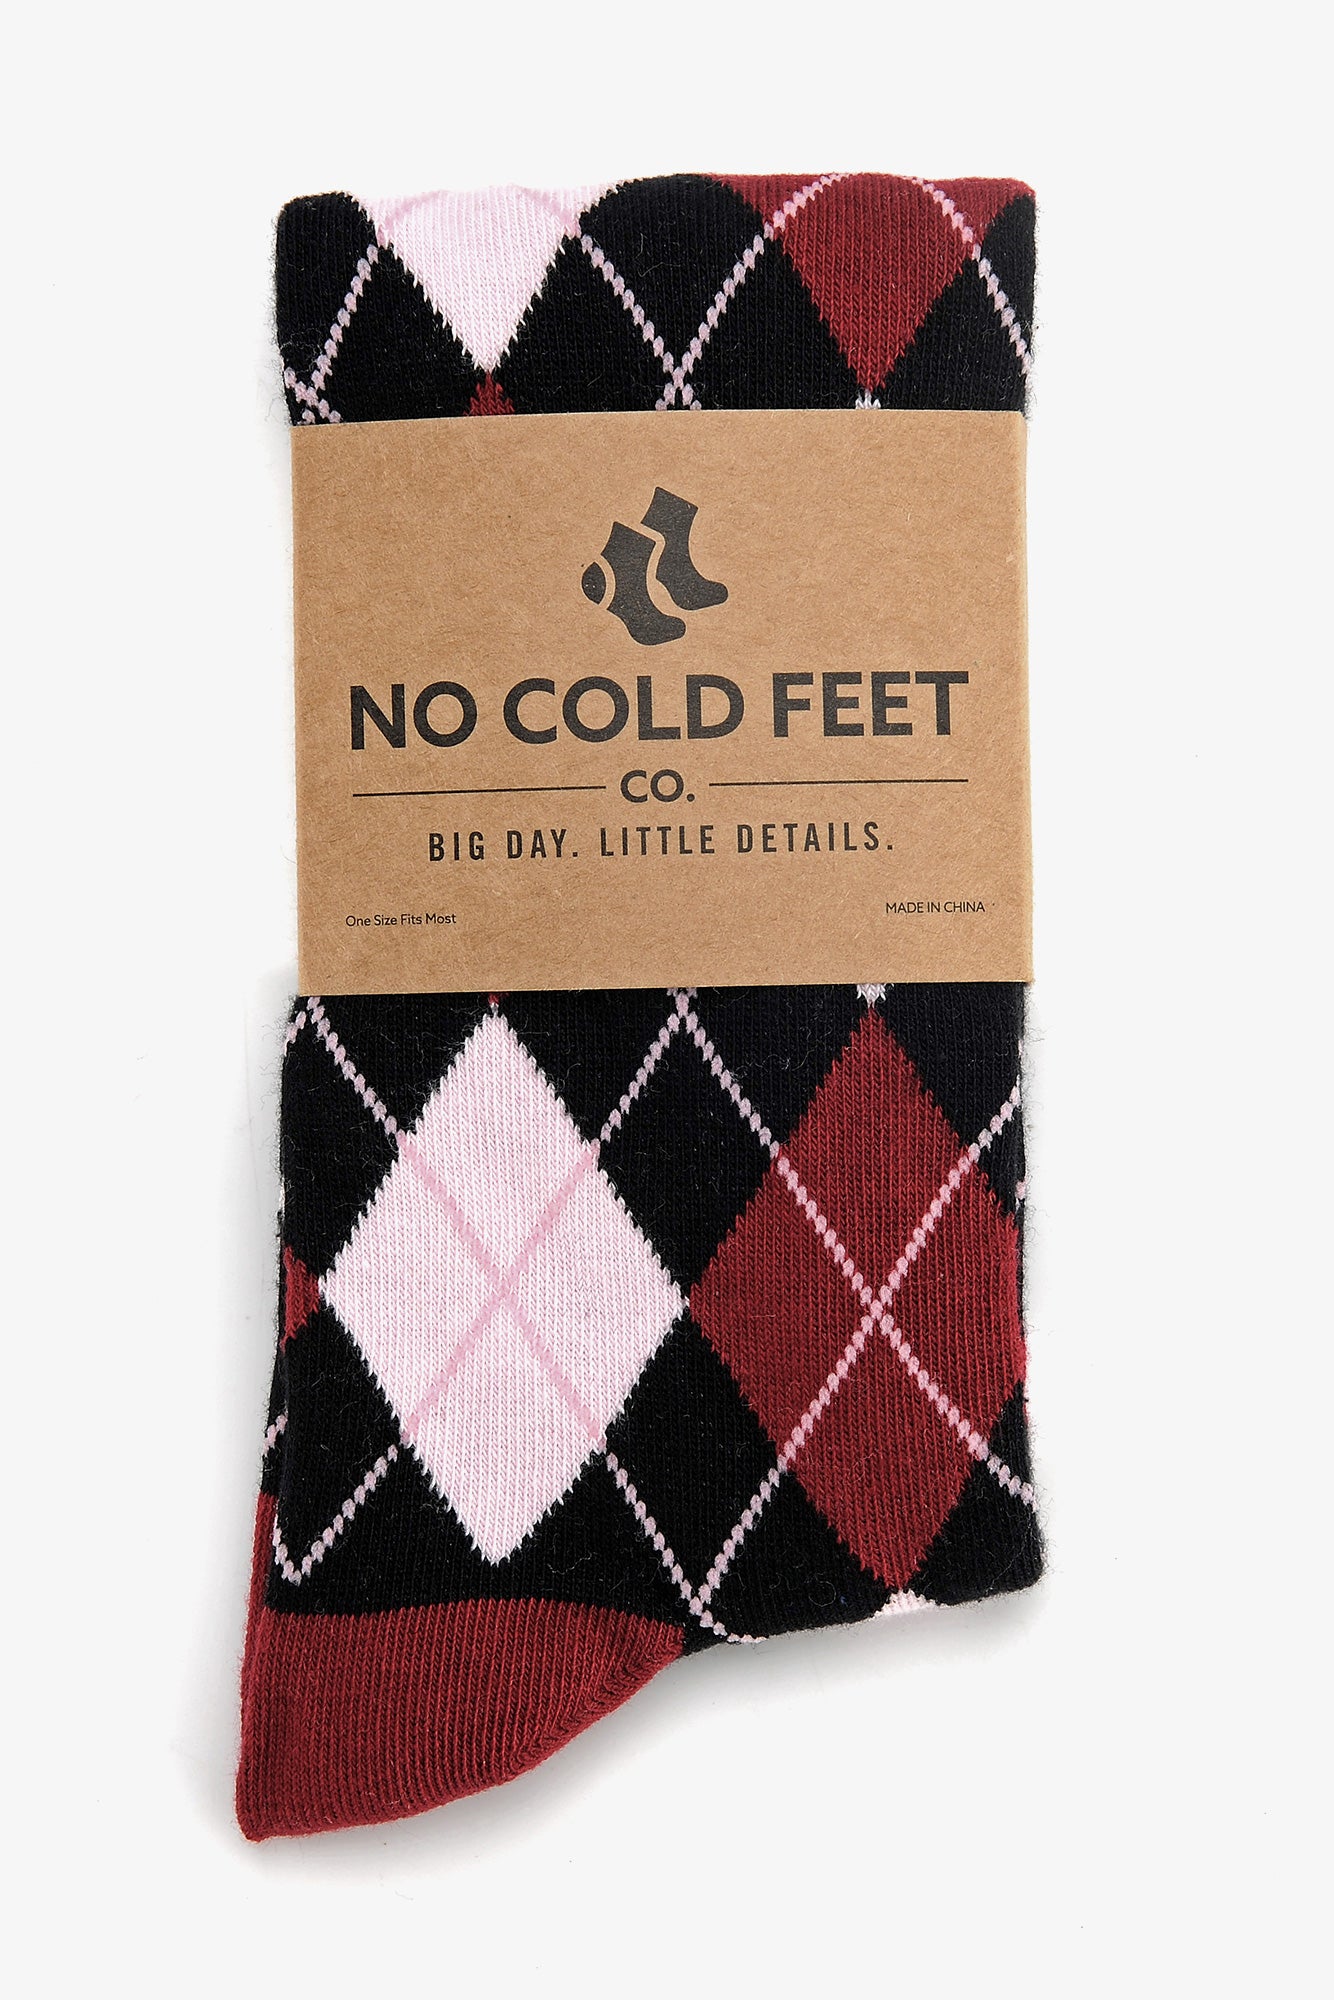 Black, Red, and Pink Argyle Groomsmen Socks by No Cold Feet